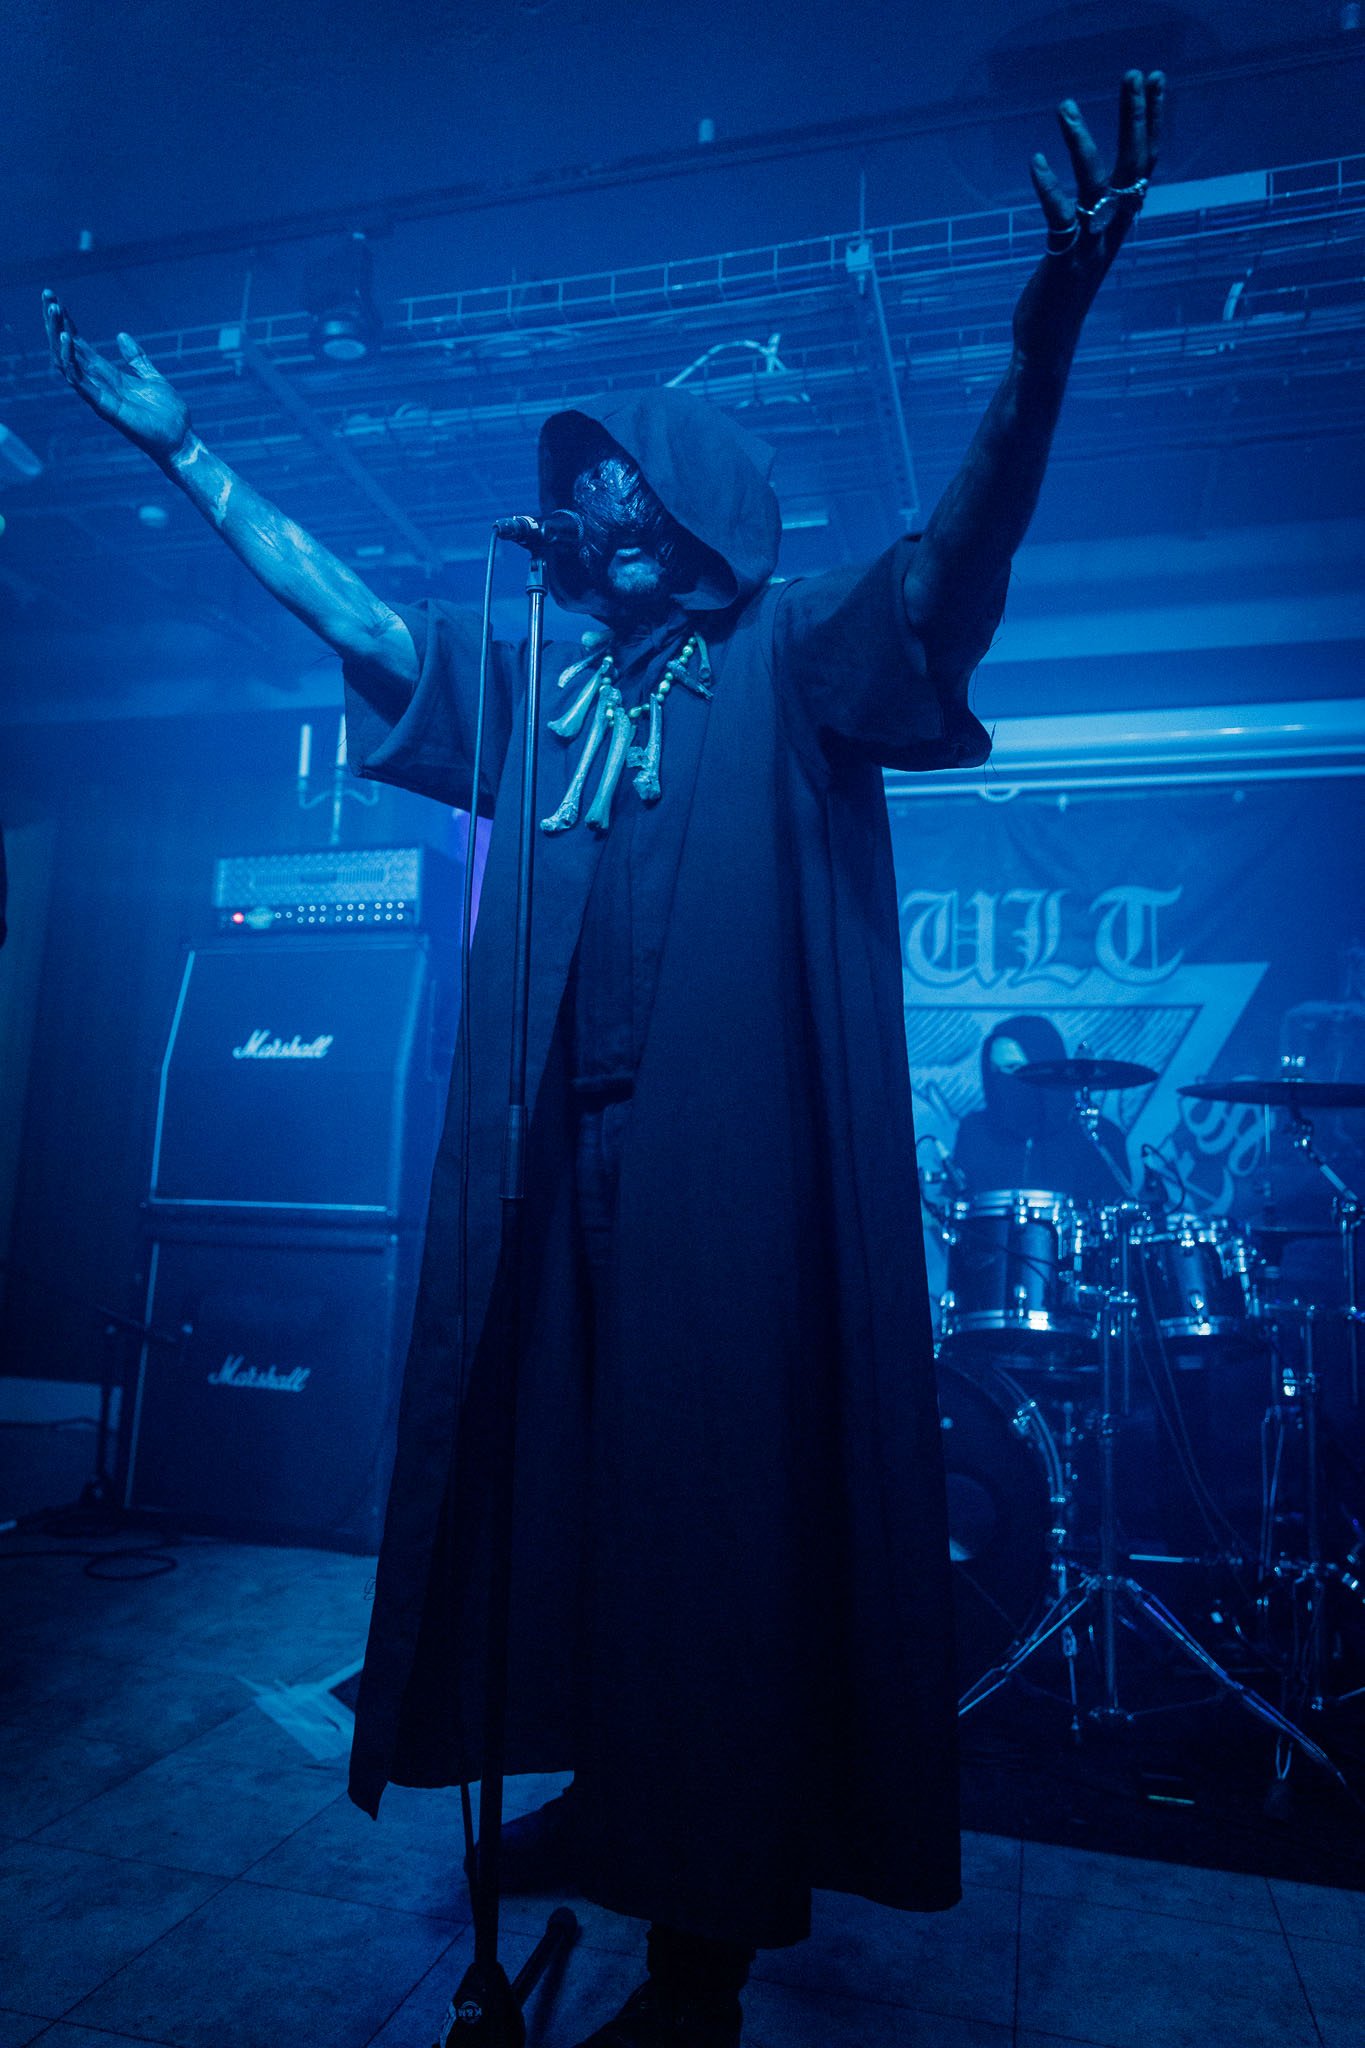 Abduction at the Damnation Festival in Leeds on November 6th 202